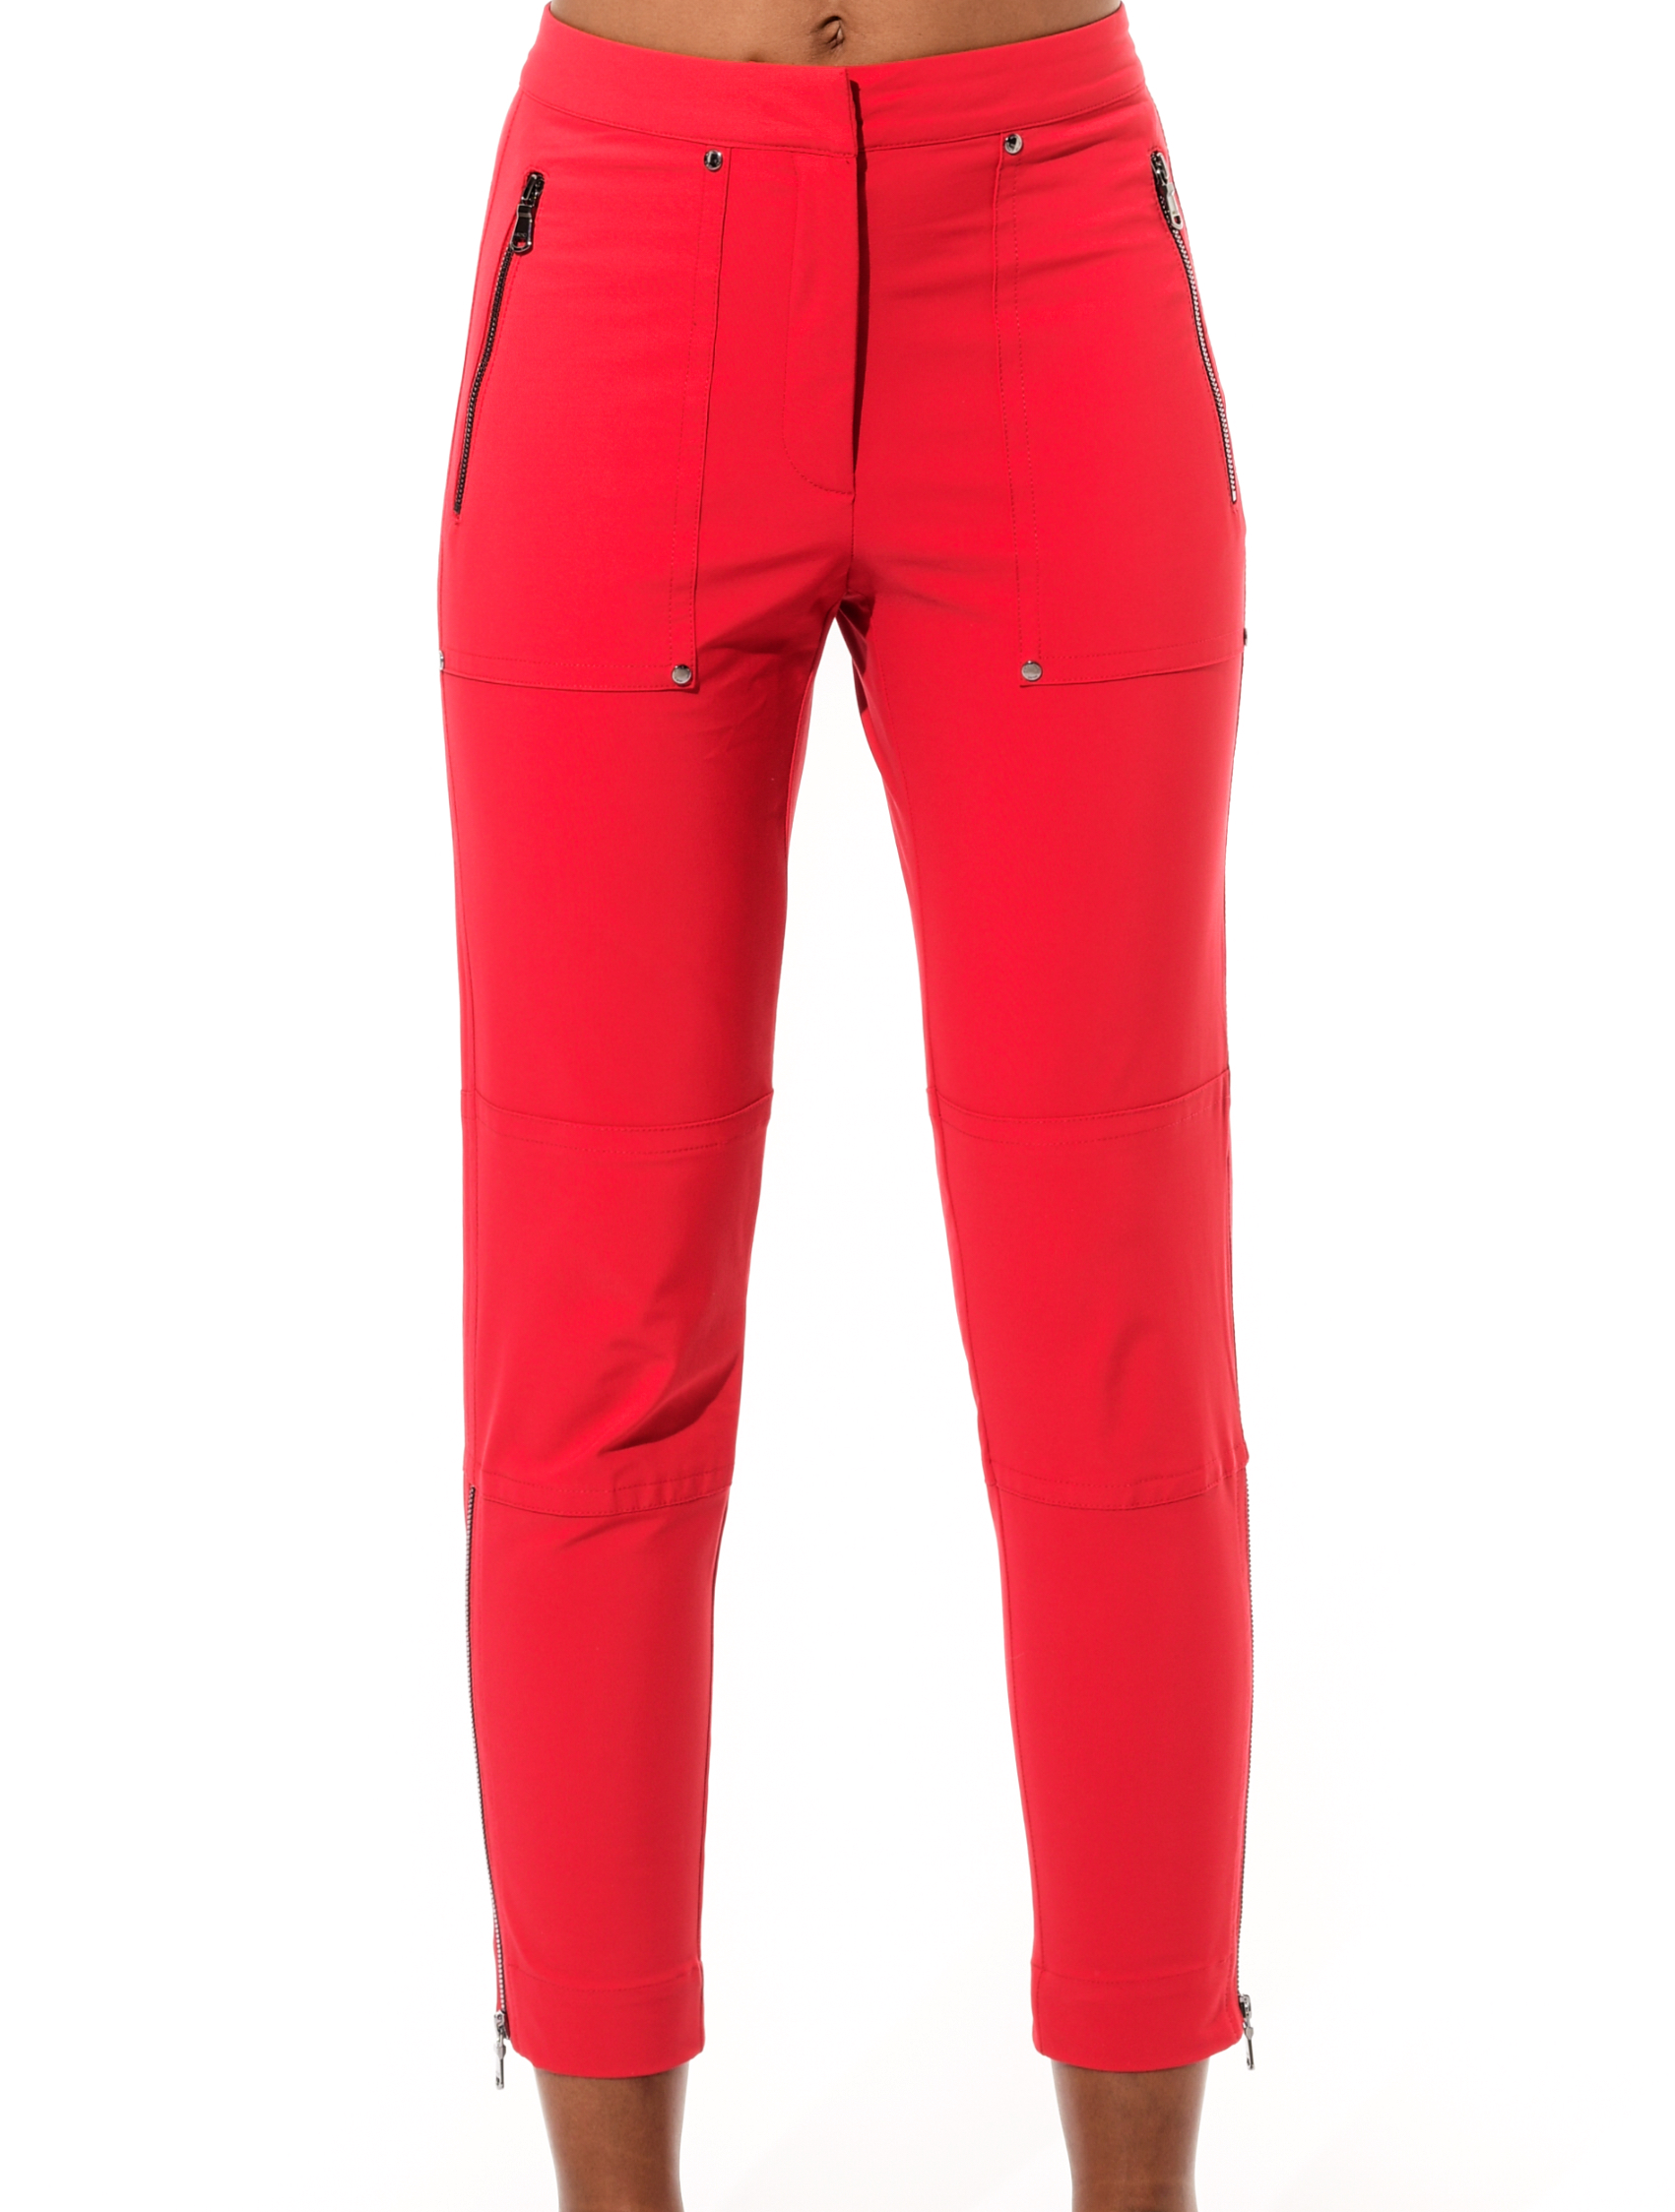 4way stretch tapered fit cargo pants red 